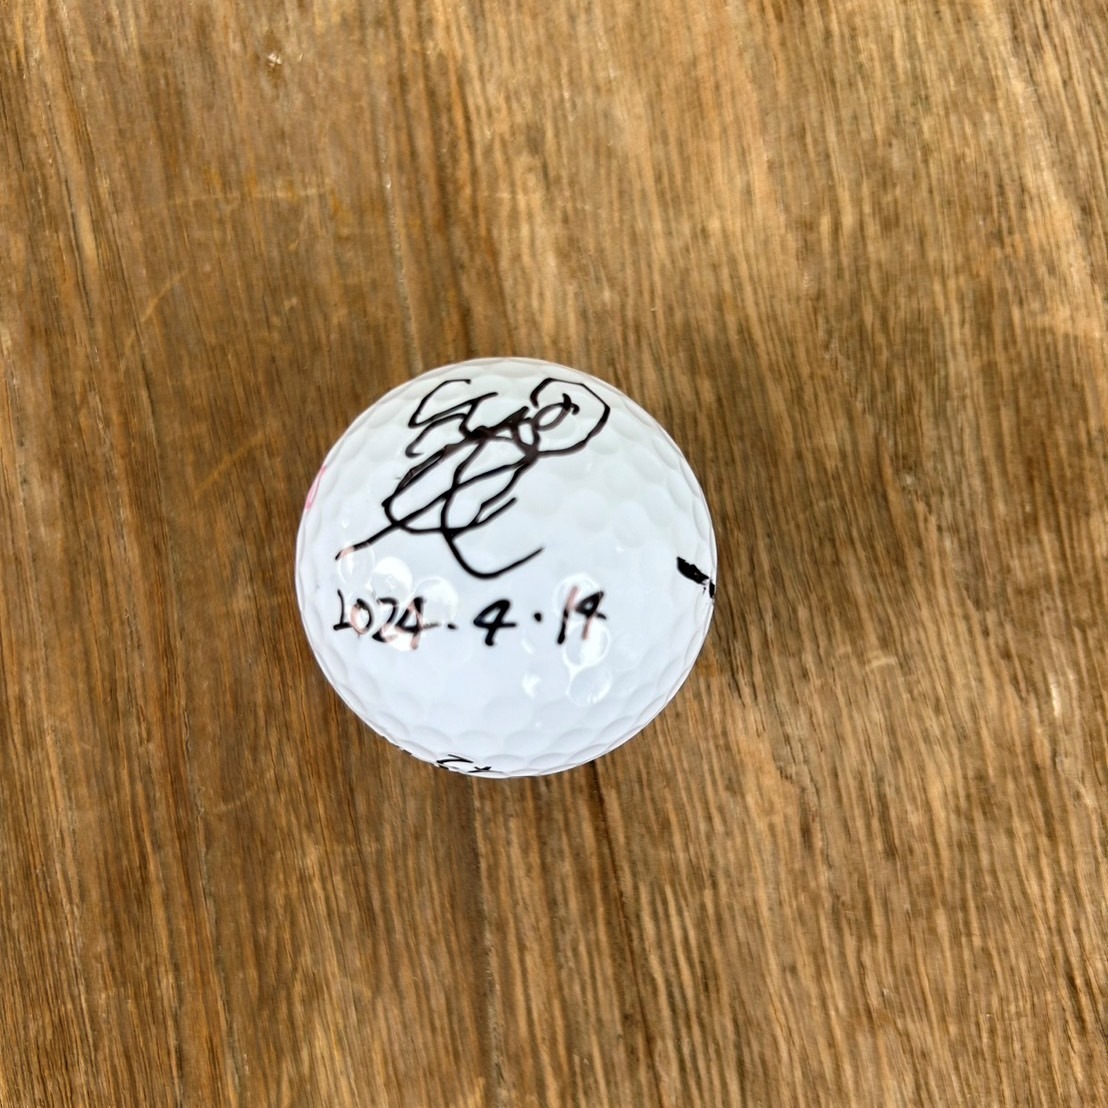 #73[KKT cup van te Lynn Lady's open charity ]2024 Winner bamboo rice field beauty . Pro # last day real use item # with autograph ball 